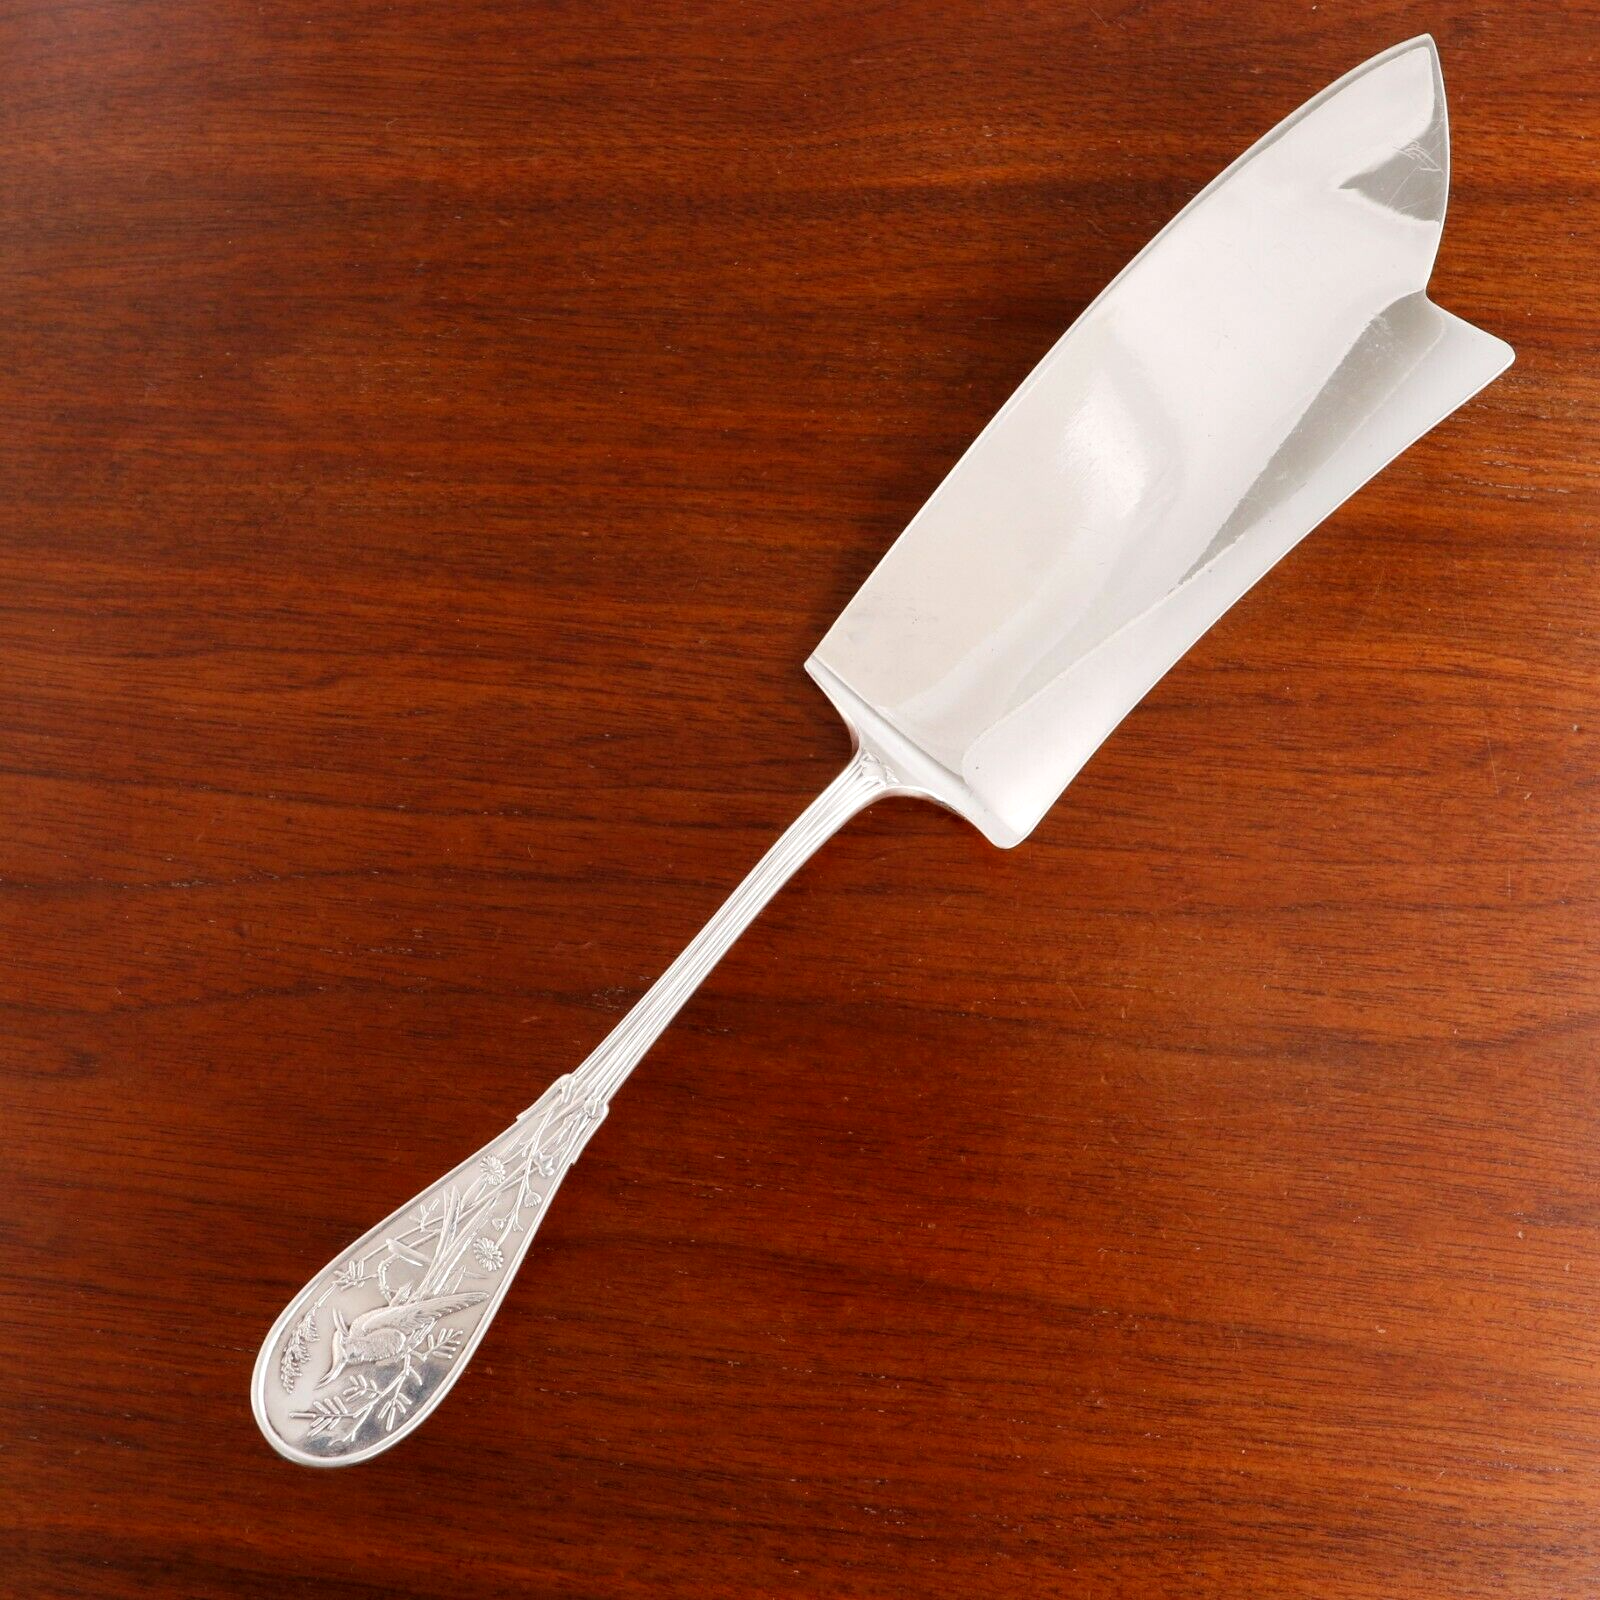 Antique Valuations: TIFFANY & CO. AMERICAN AESTHETIC STERLING SILVER FISH SLICE SERVER JAPANESE 1871